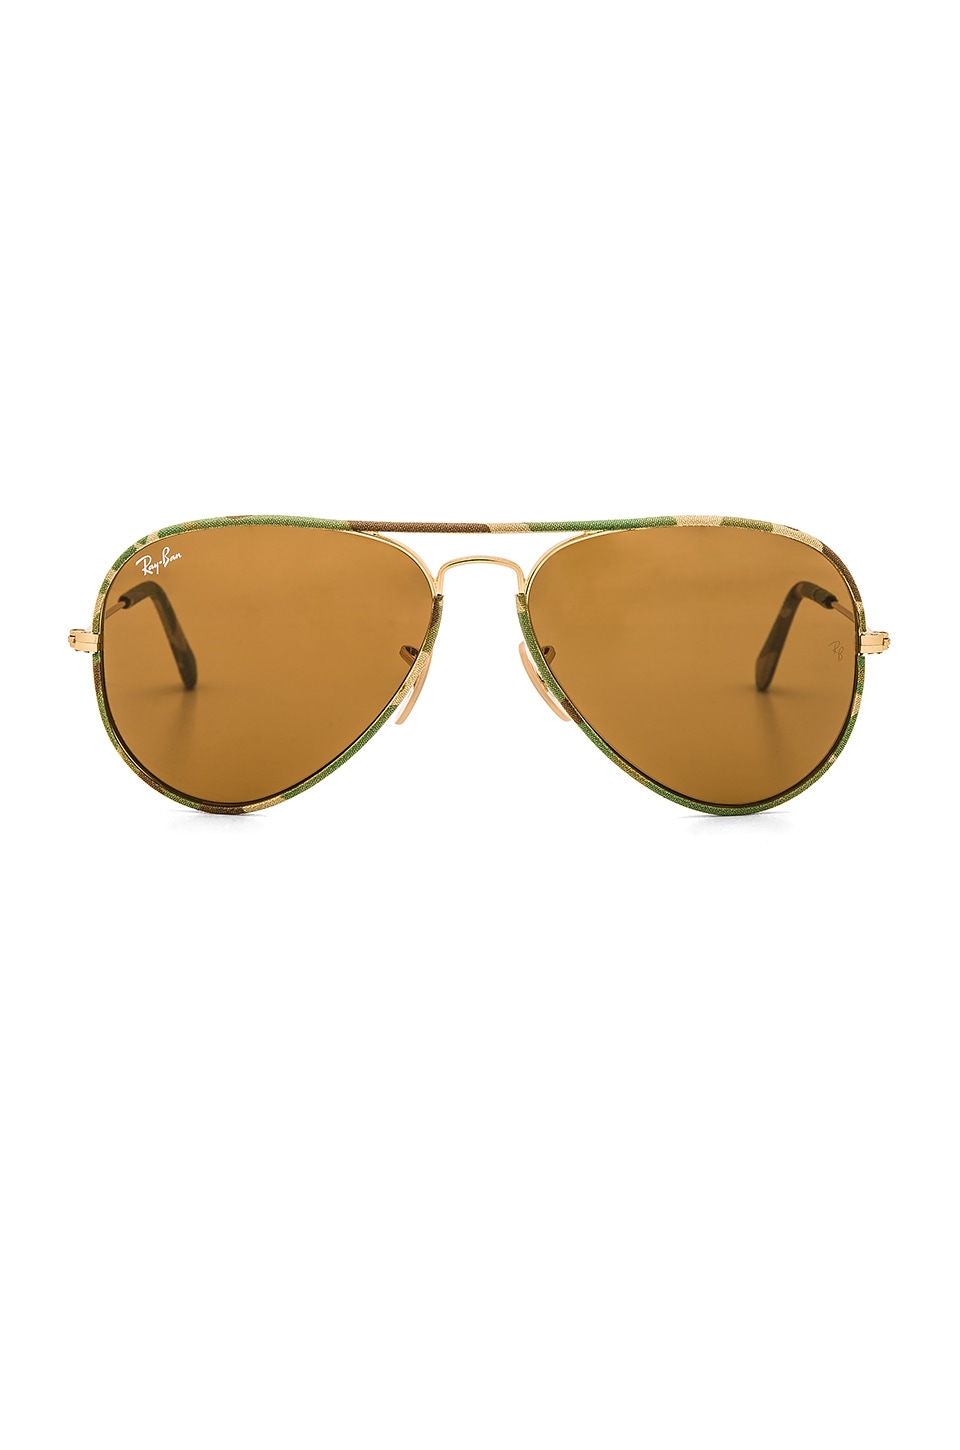 Ray-Ban Aviator Full in Army & Gold & Brown Classic | REVOLVE